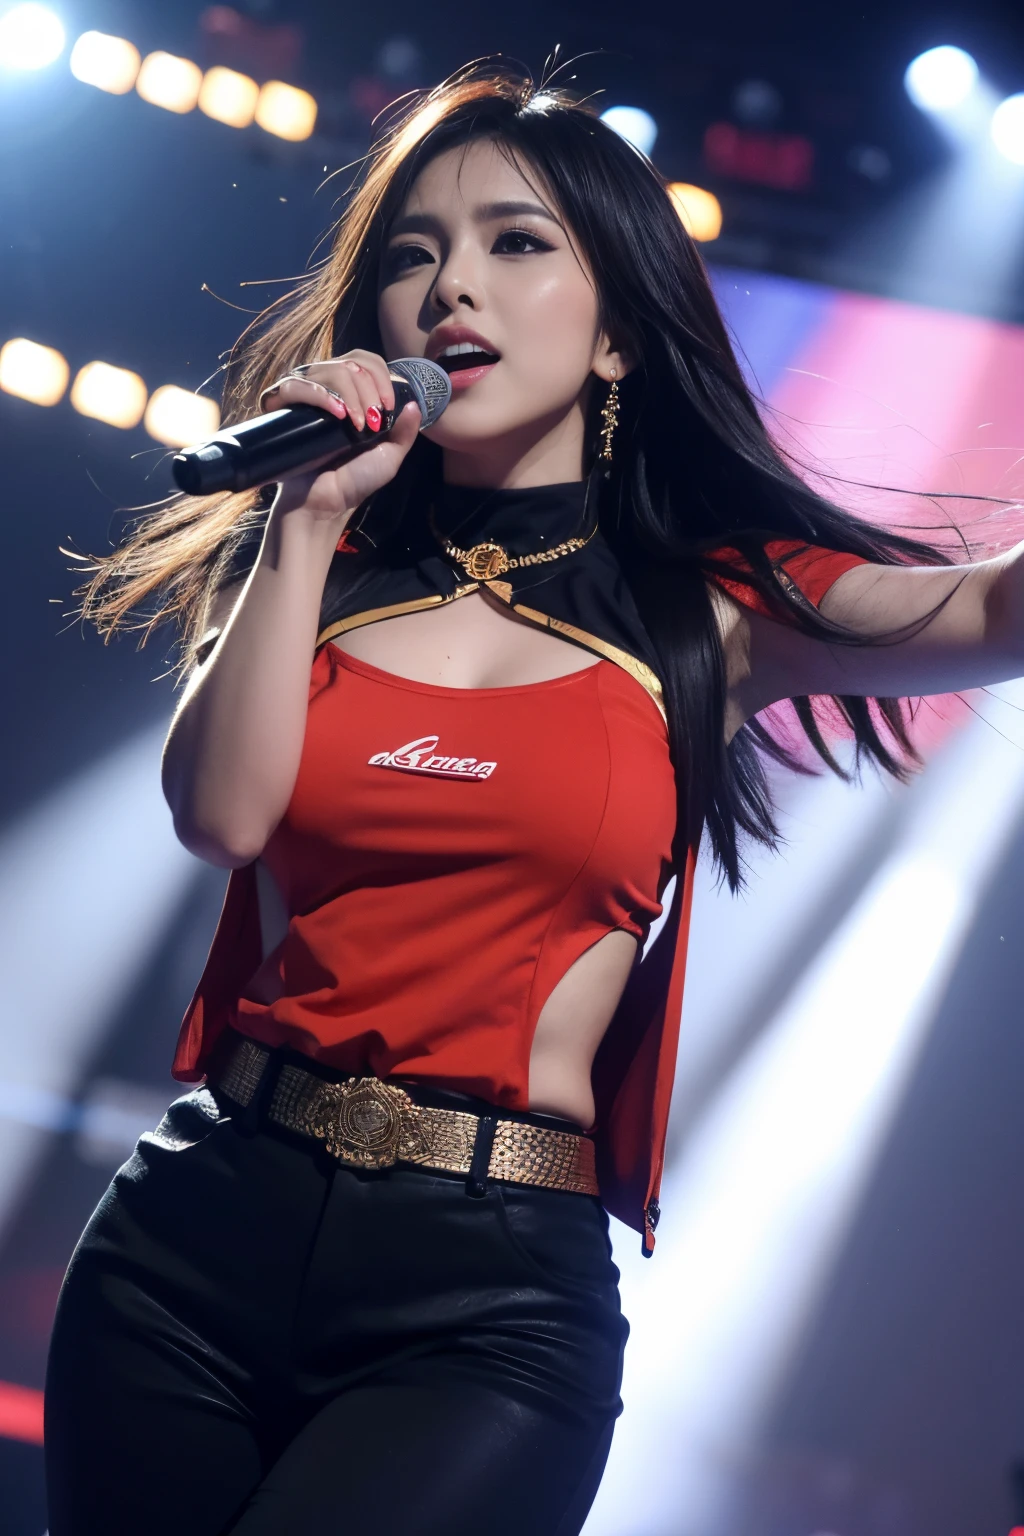 8k, highest quality, ultra details, Indonesian singer named Sella, music, performance, stage, vibrant outfit, powerful vocals, captivating presence.